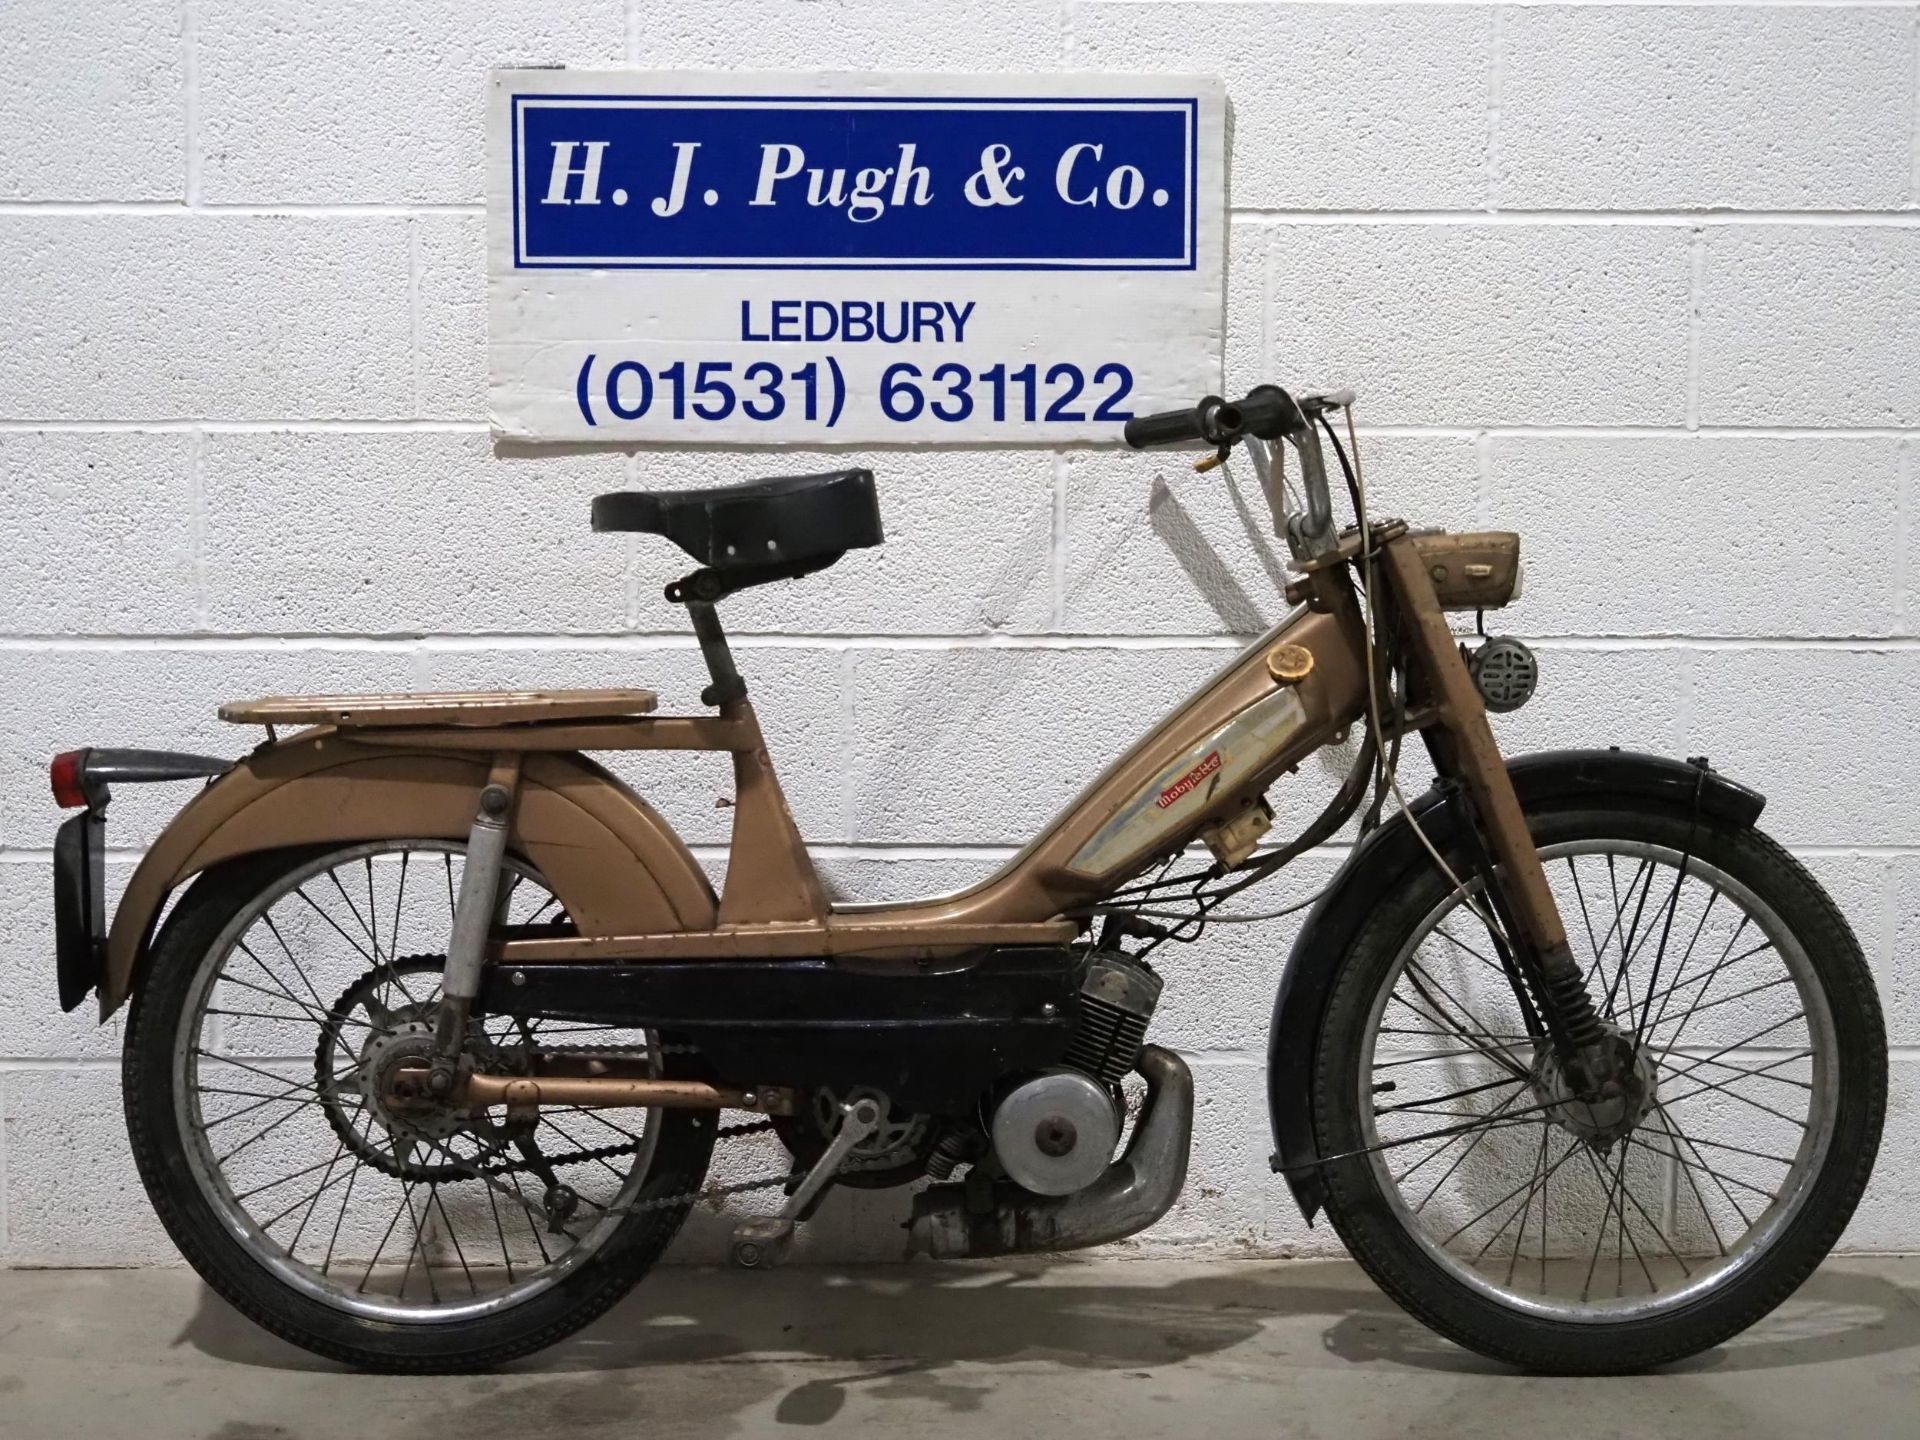 Motobecane Mobylette moped. 1970. Engine No. 8002169 Has been stored for some time. No docs.